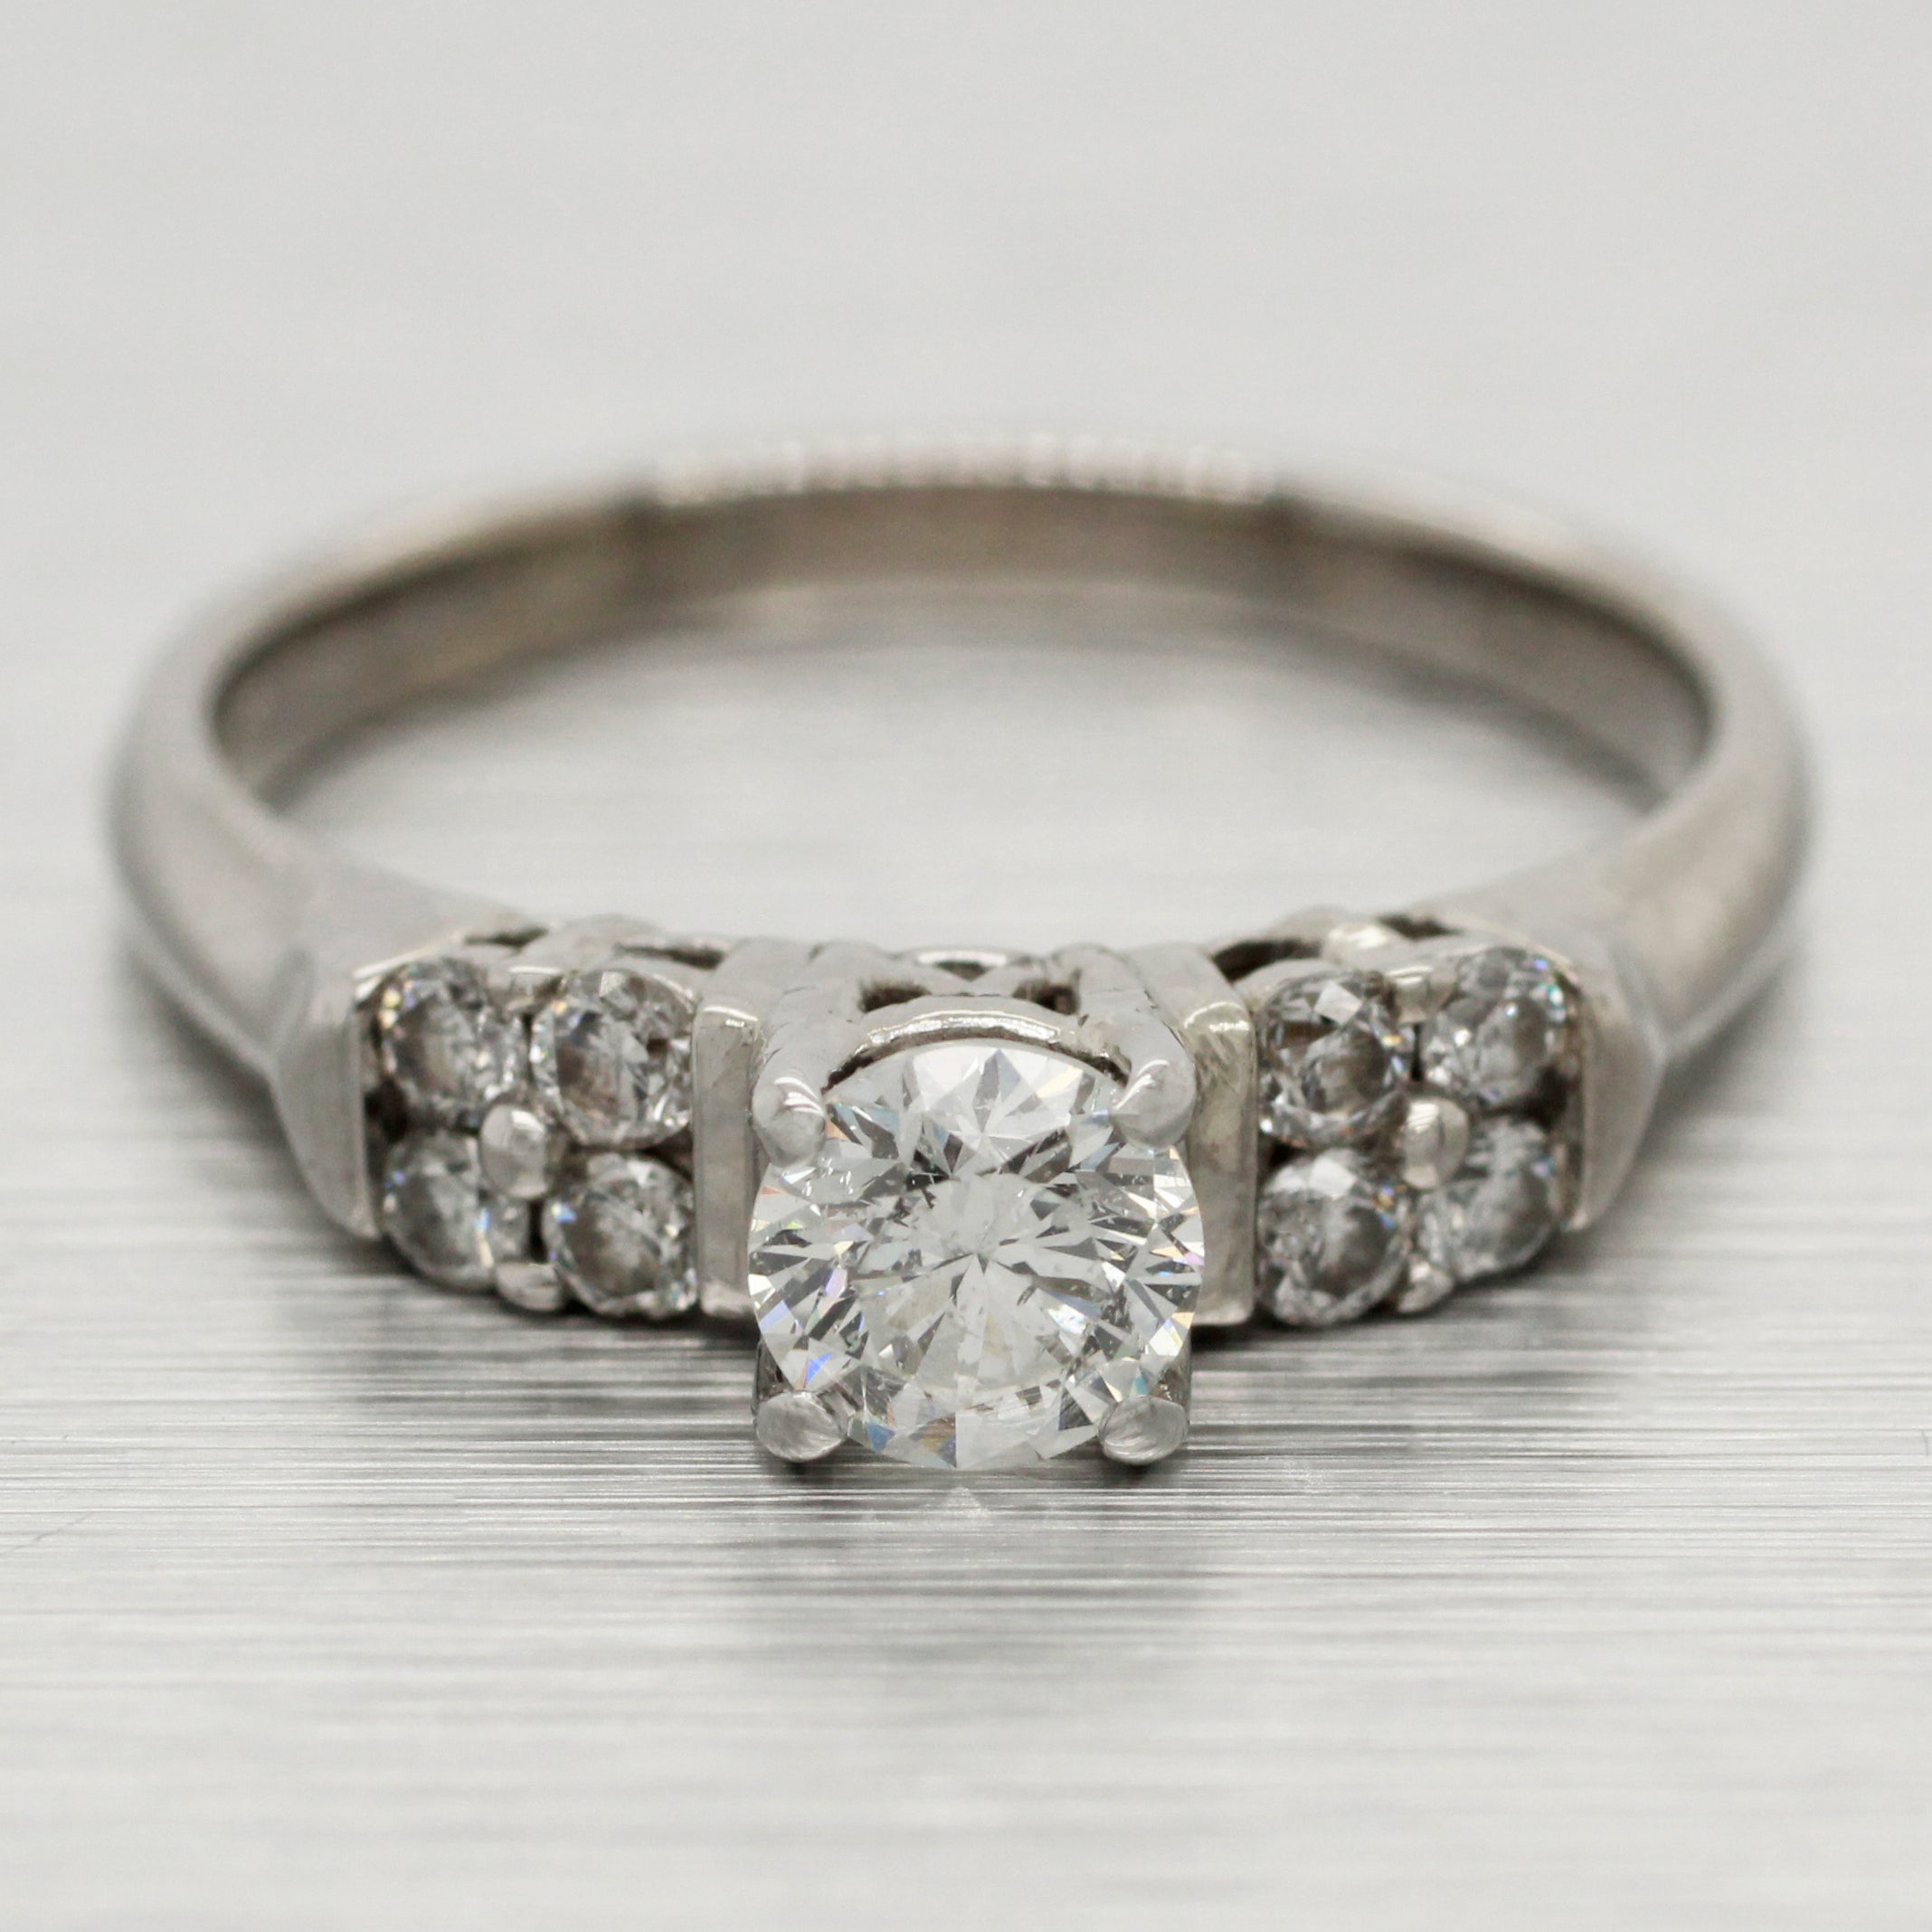 Vintage 0.40ct Diamond Engagement Ring with 0.20ctw Accents - 14k White Gold